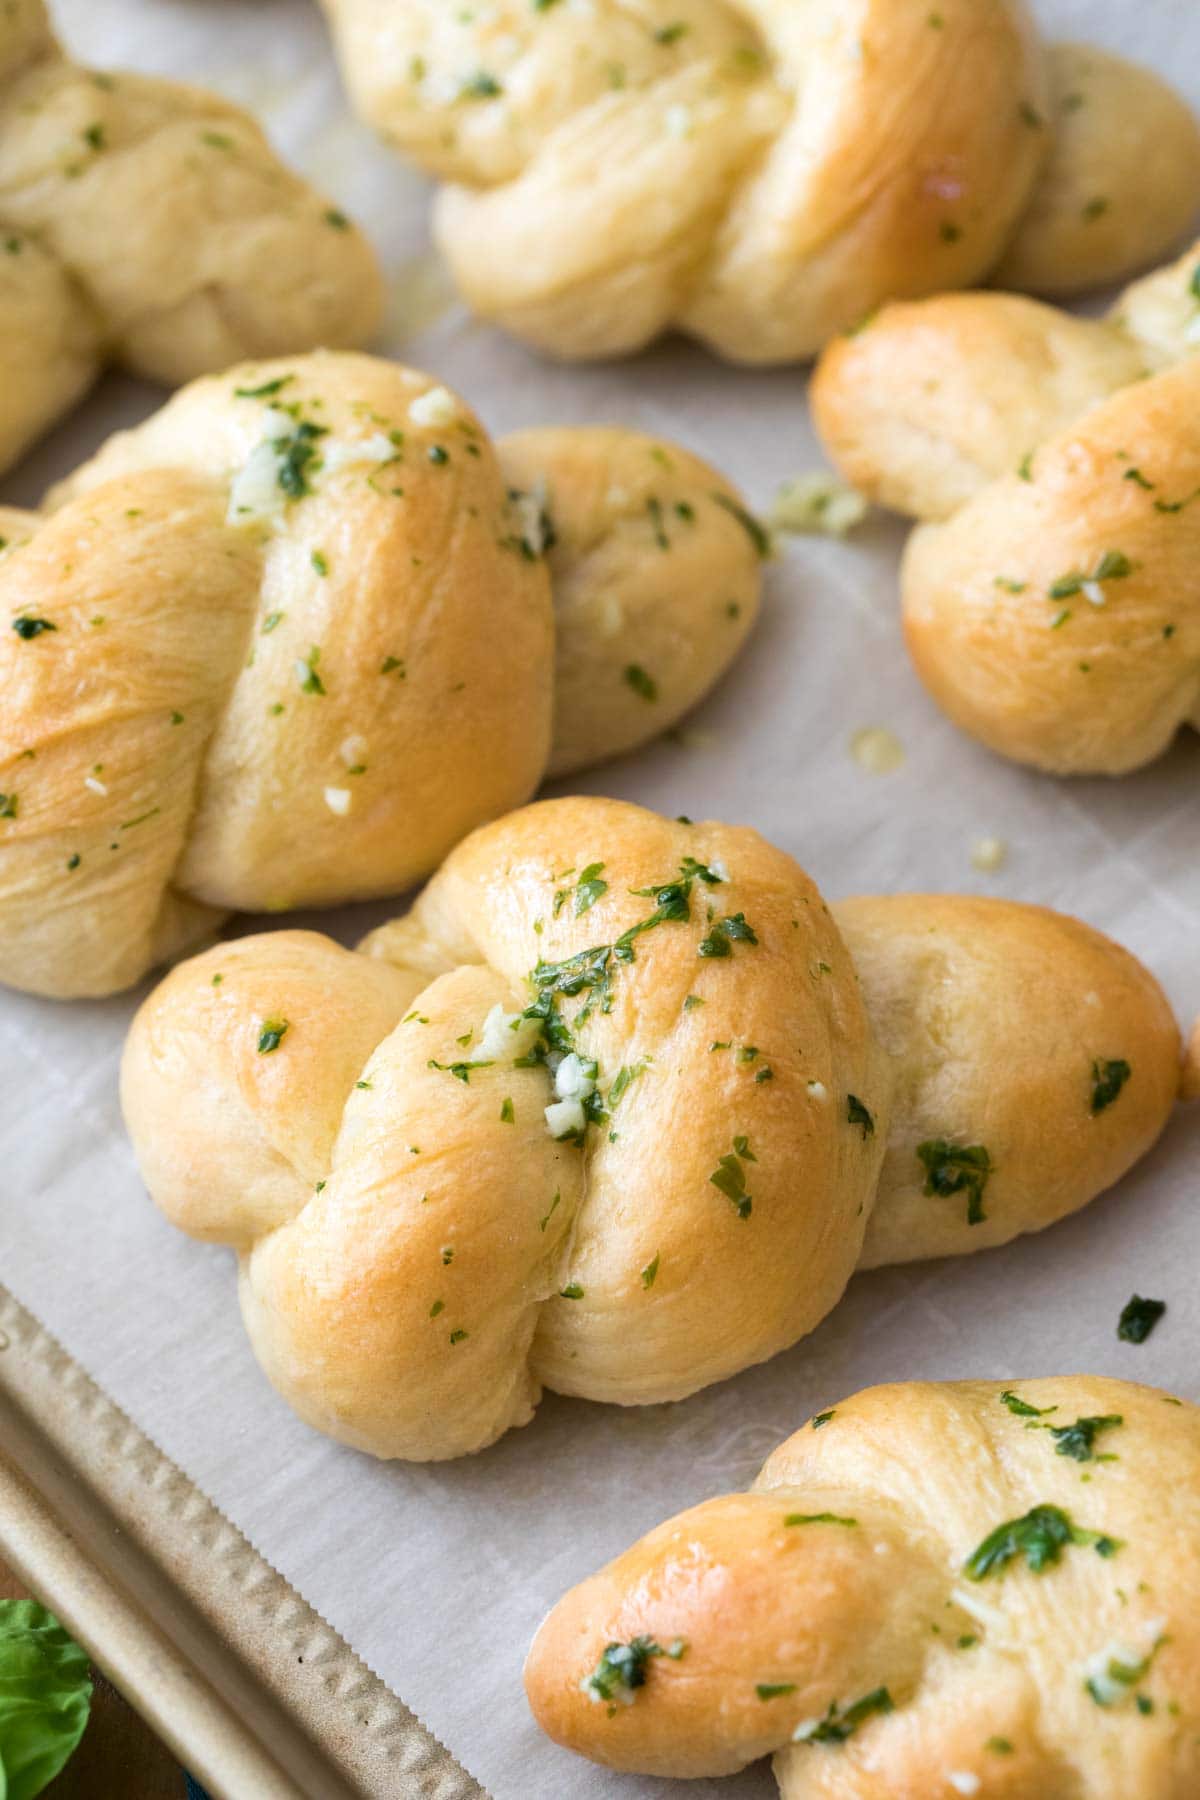 Garlic knots topped with garlic butter and fresh basil after baking.